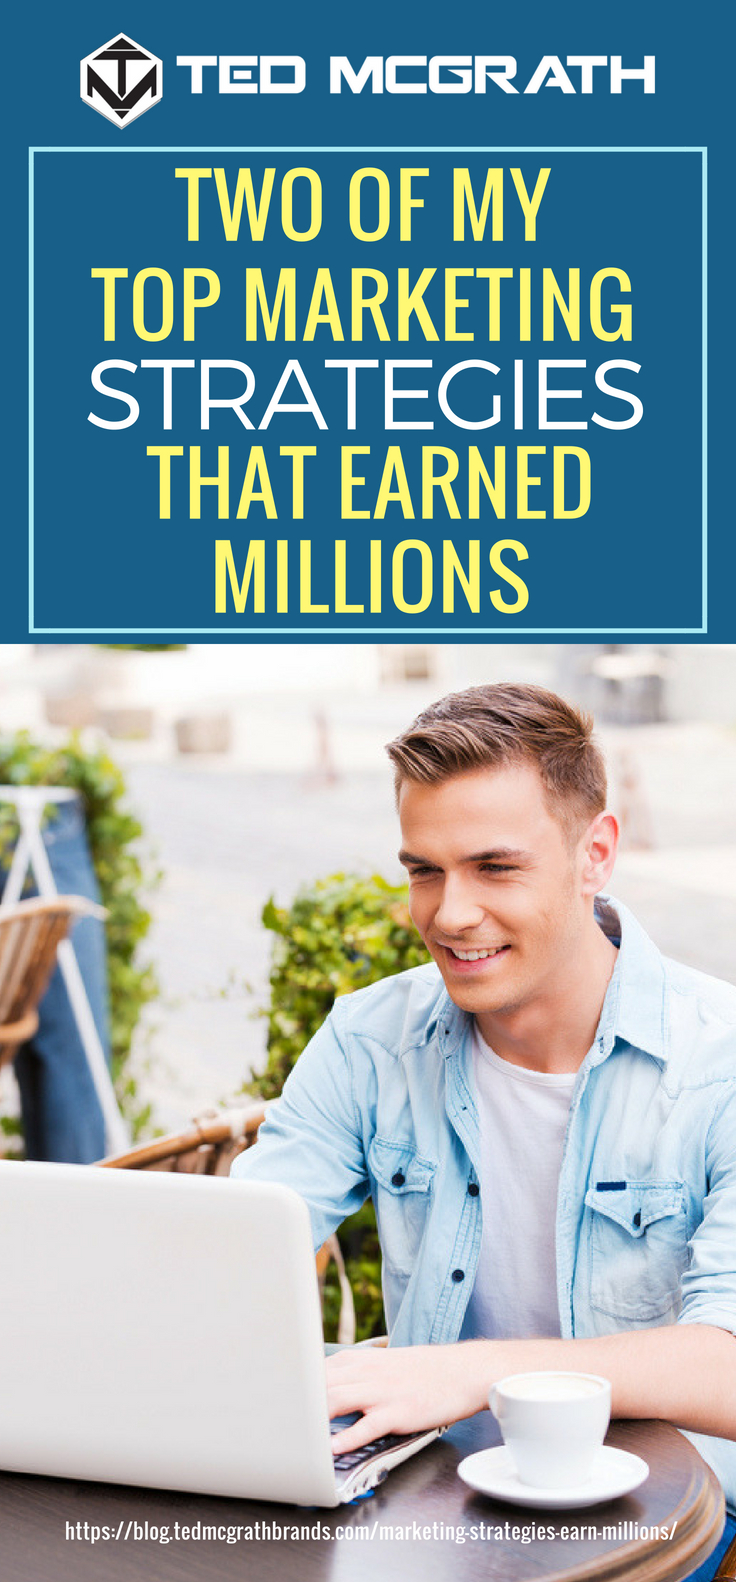 Two Of My Top Marketing Strategies That Earned Millions